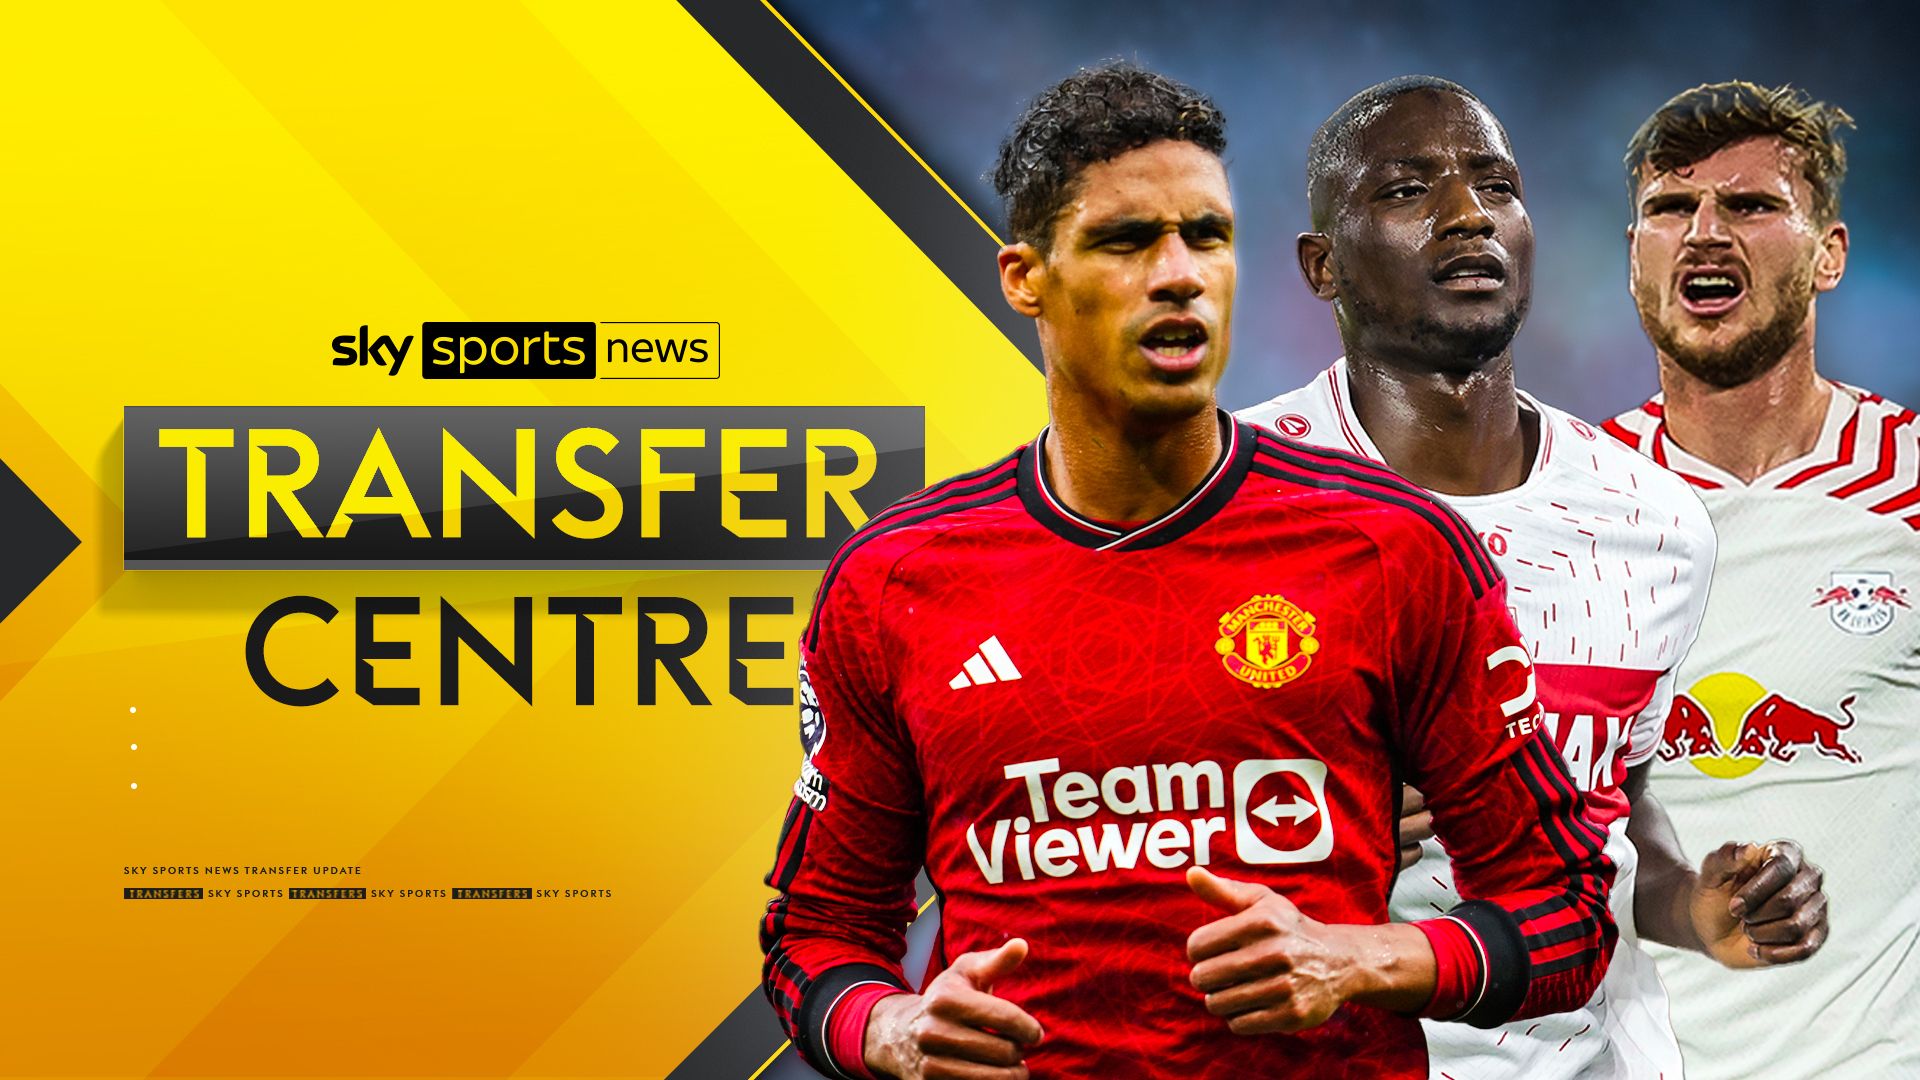 Man Utd Transfer Latest: Varane Out and Werner In?